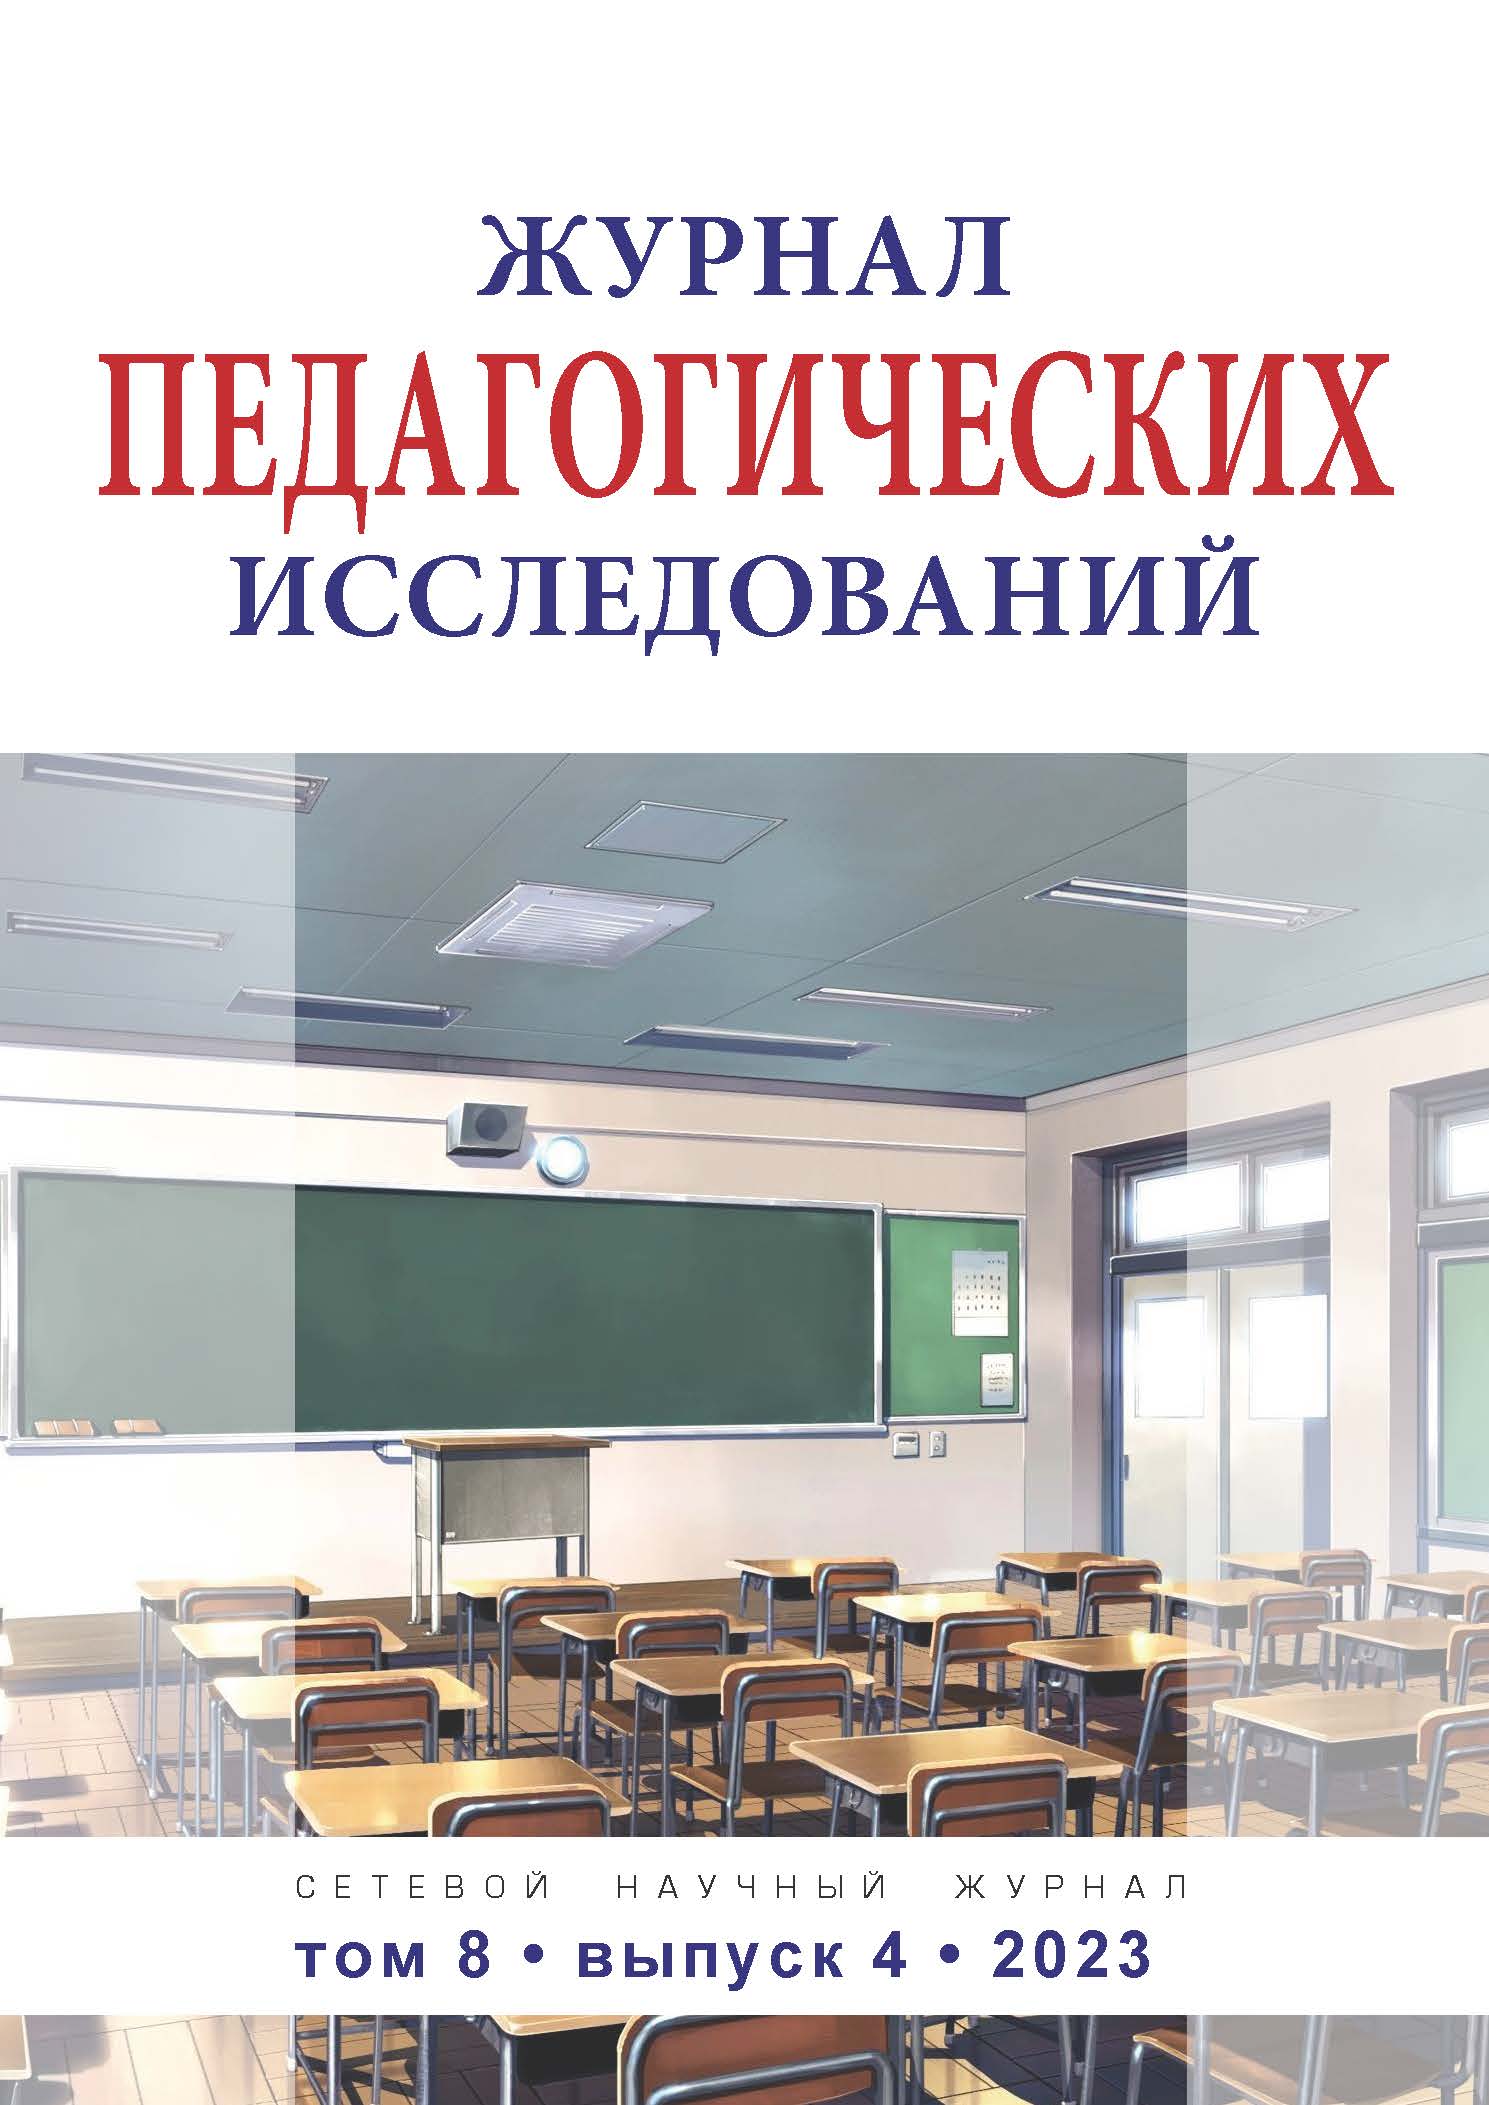                         Pedagogical conditions for the success  of the formation of a responsible attitude to weapons among young students
            